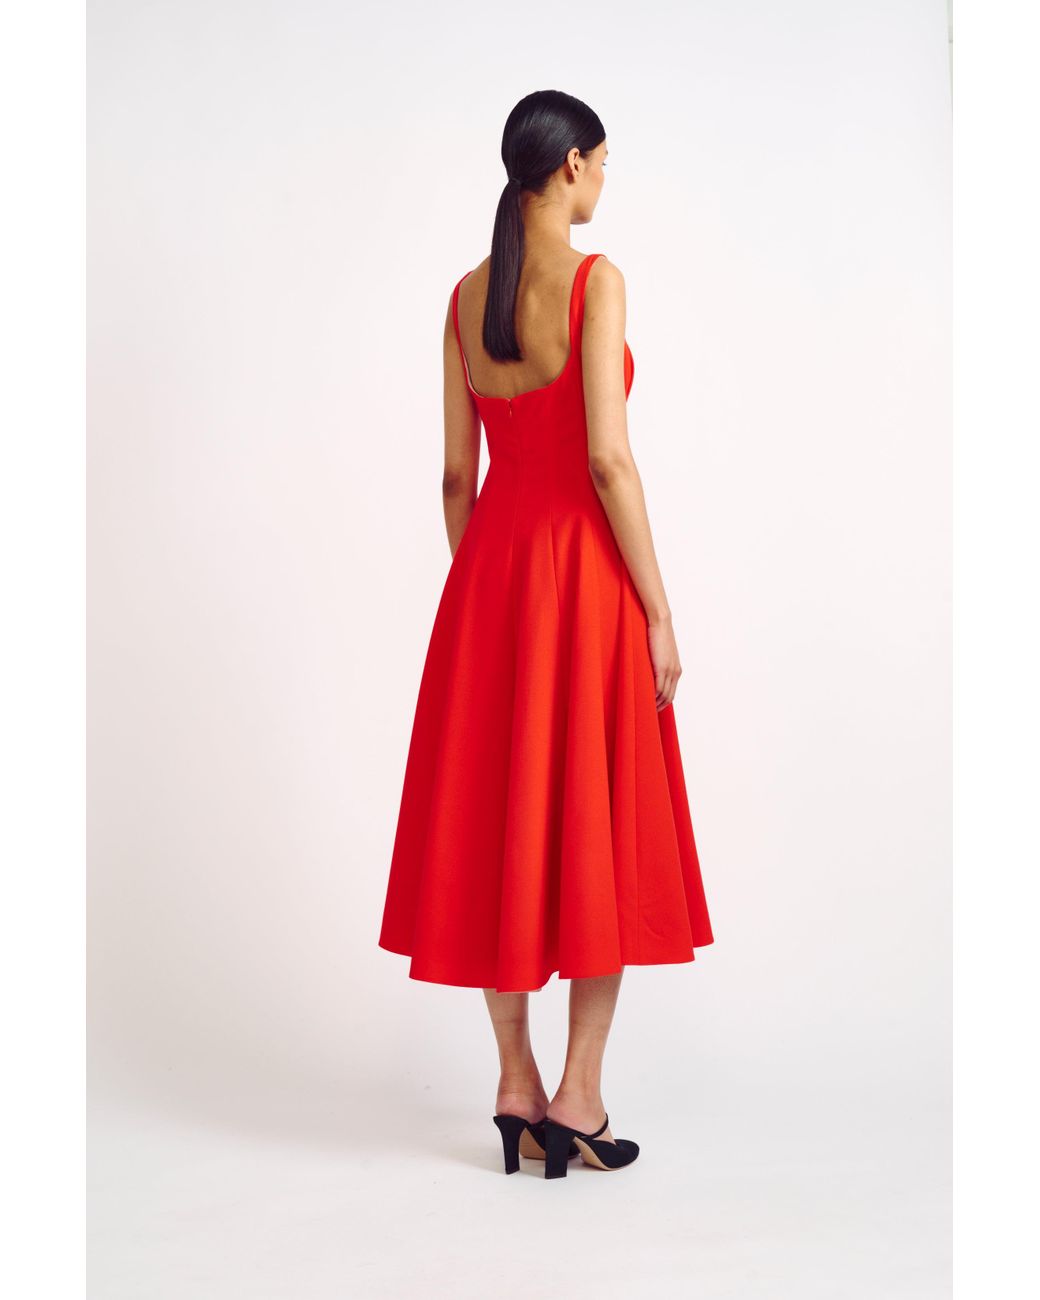 Emilia Wickstead Collins Coral Single Wool Crepe Dress in Red | Lyst UK